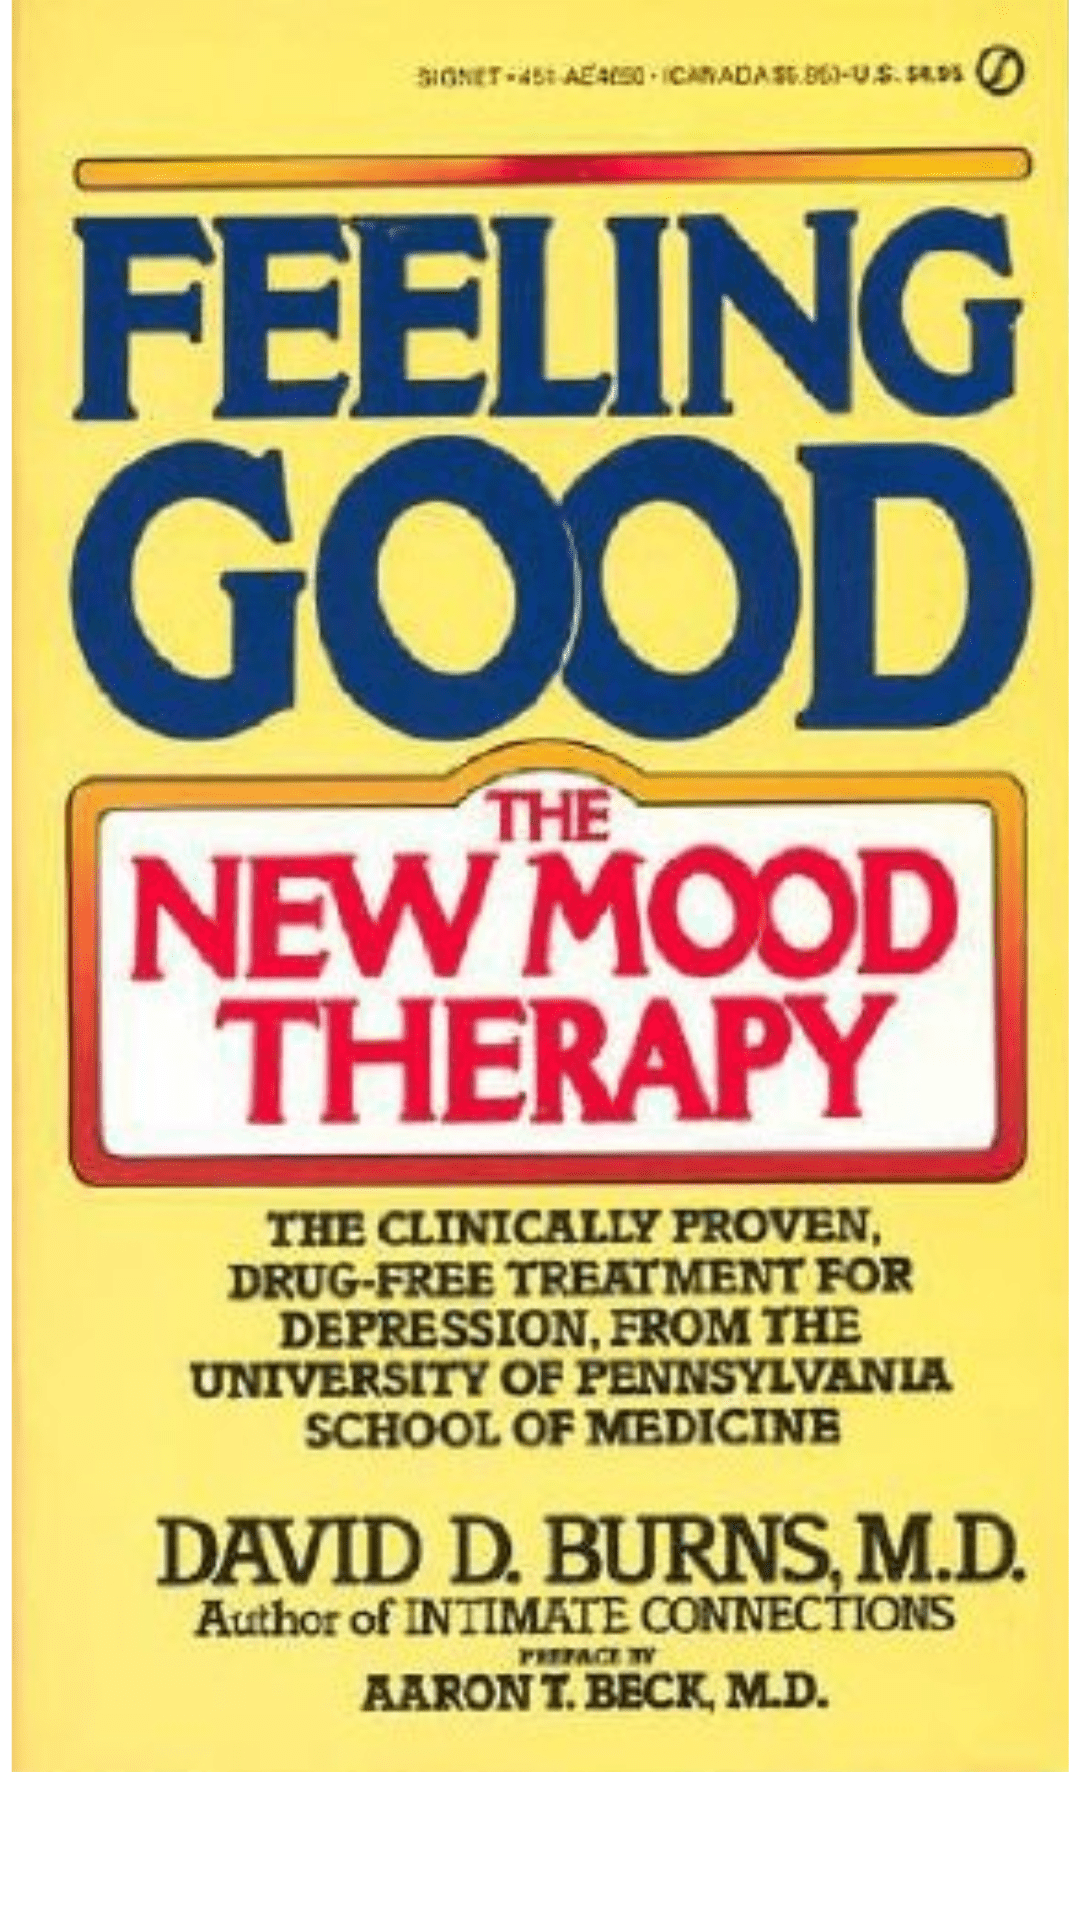 Feeling Good: The New Mood Therapy (Visible wear and tear on cover)